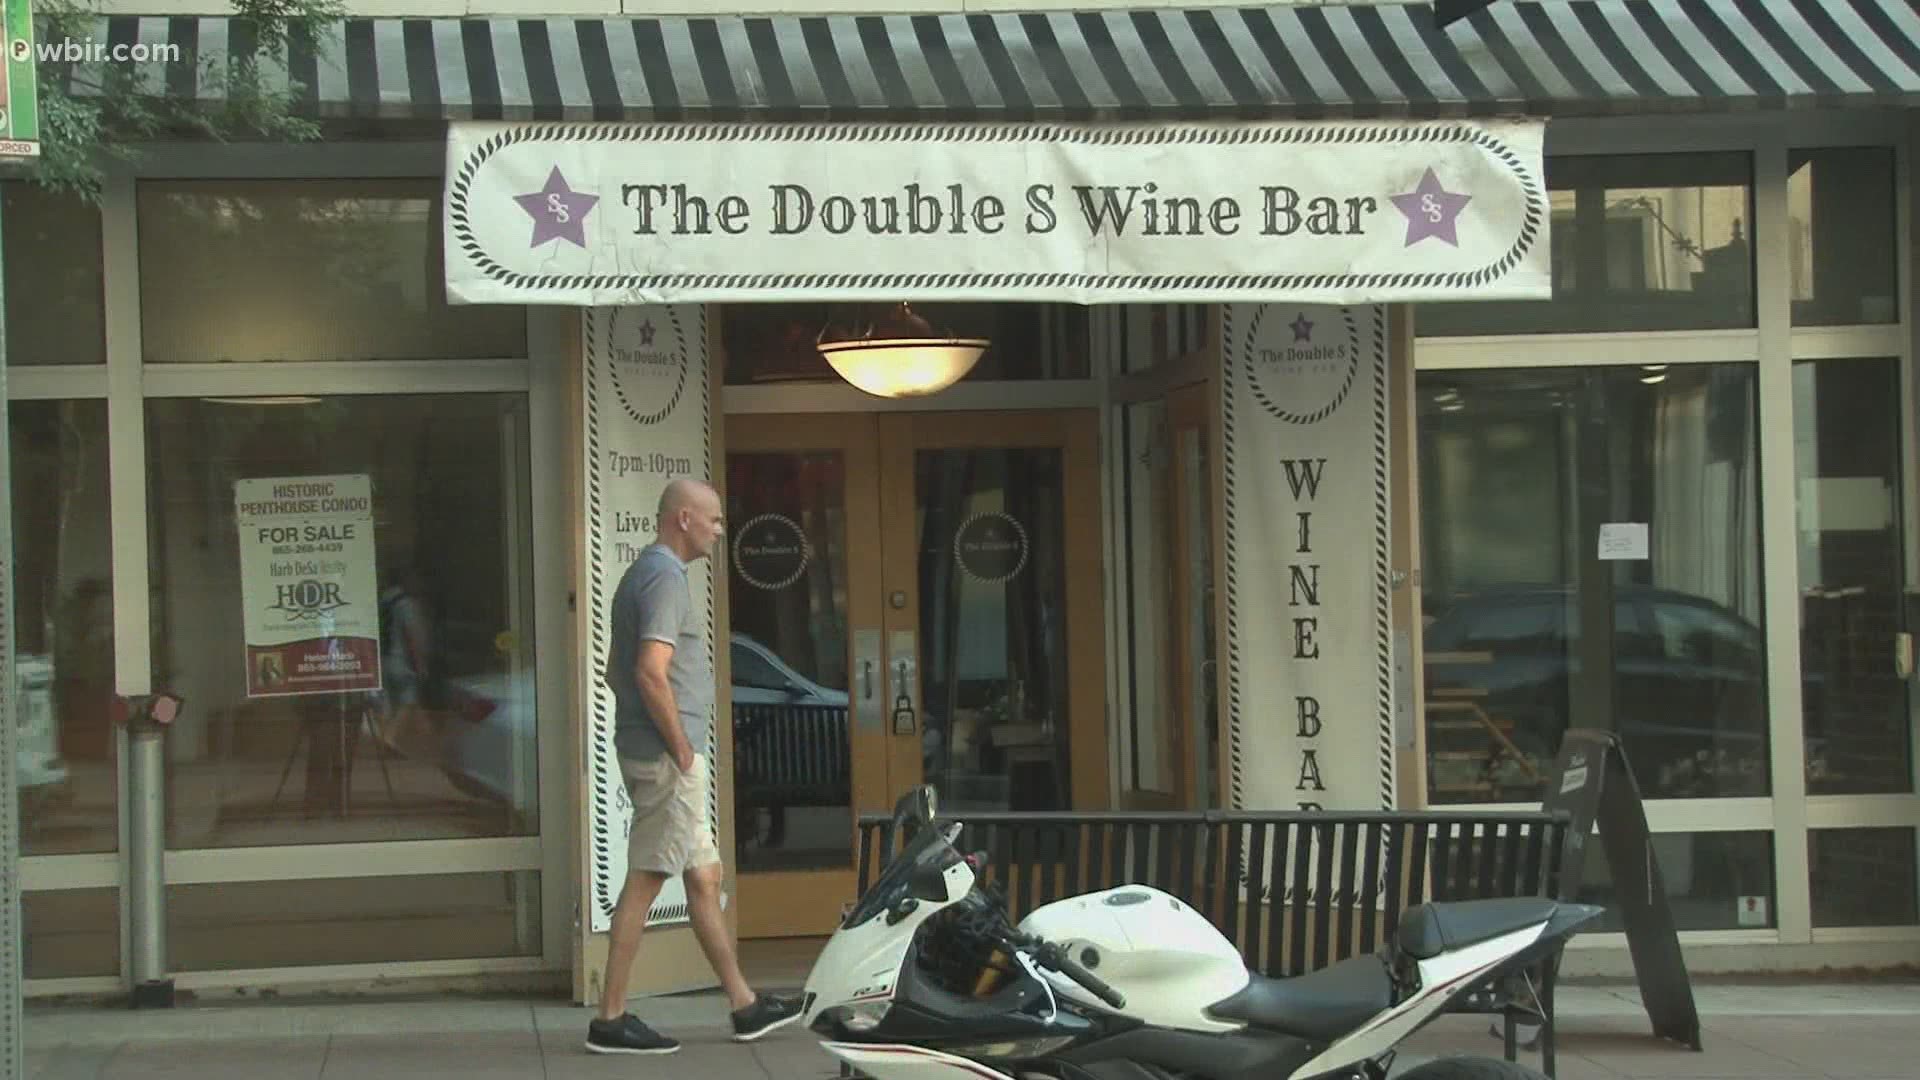 The Double S Wine Bar hosts Latin Nights where the Latino community can come and dance.